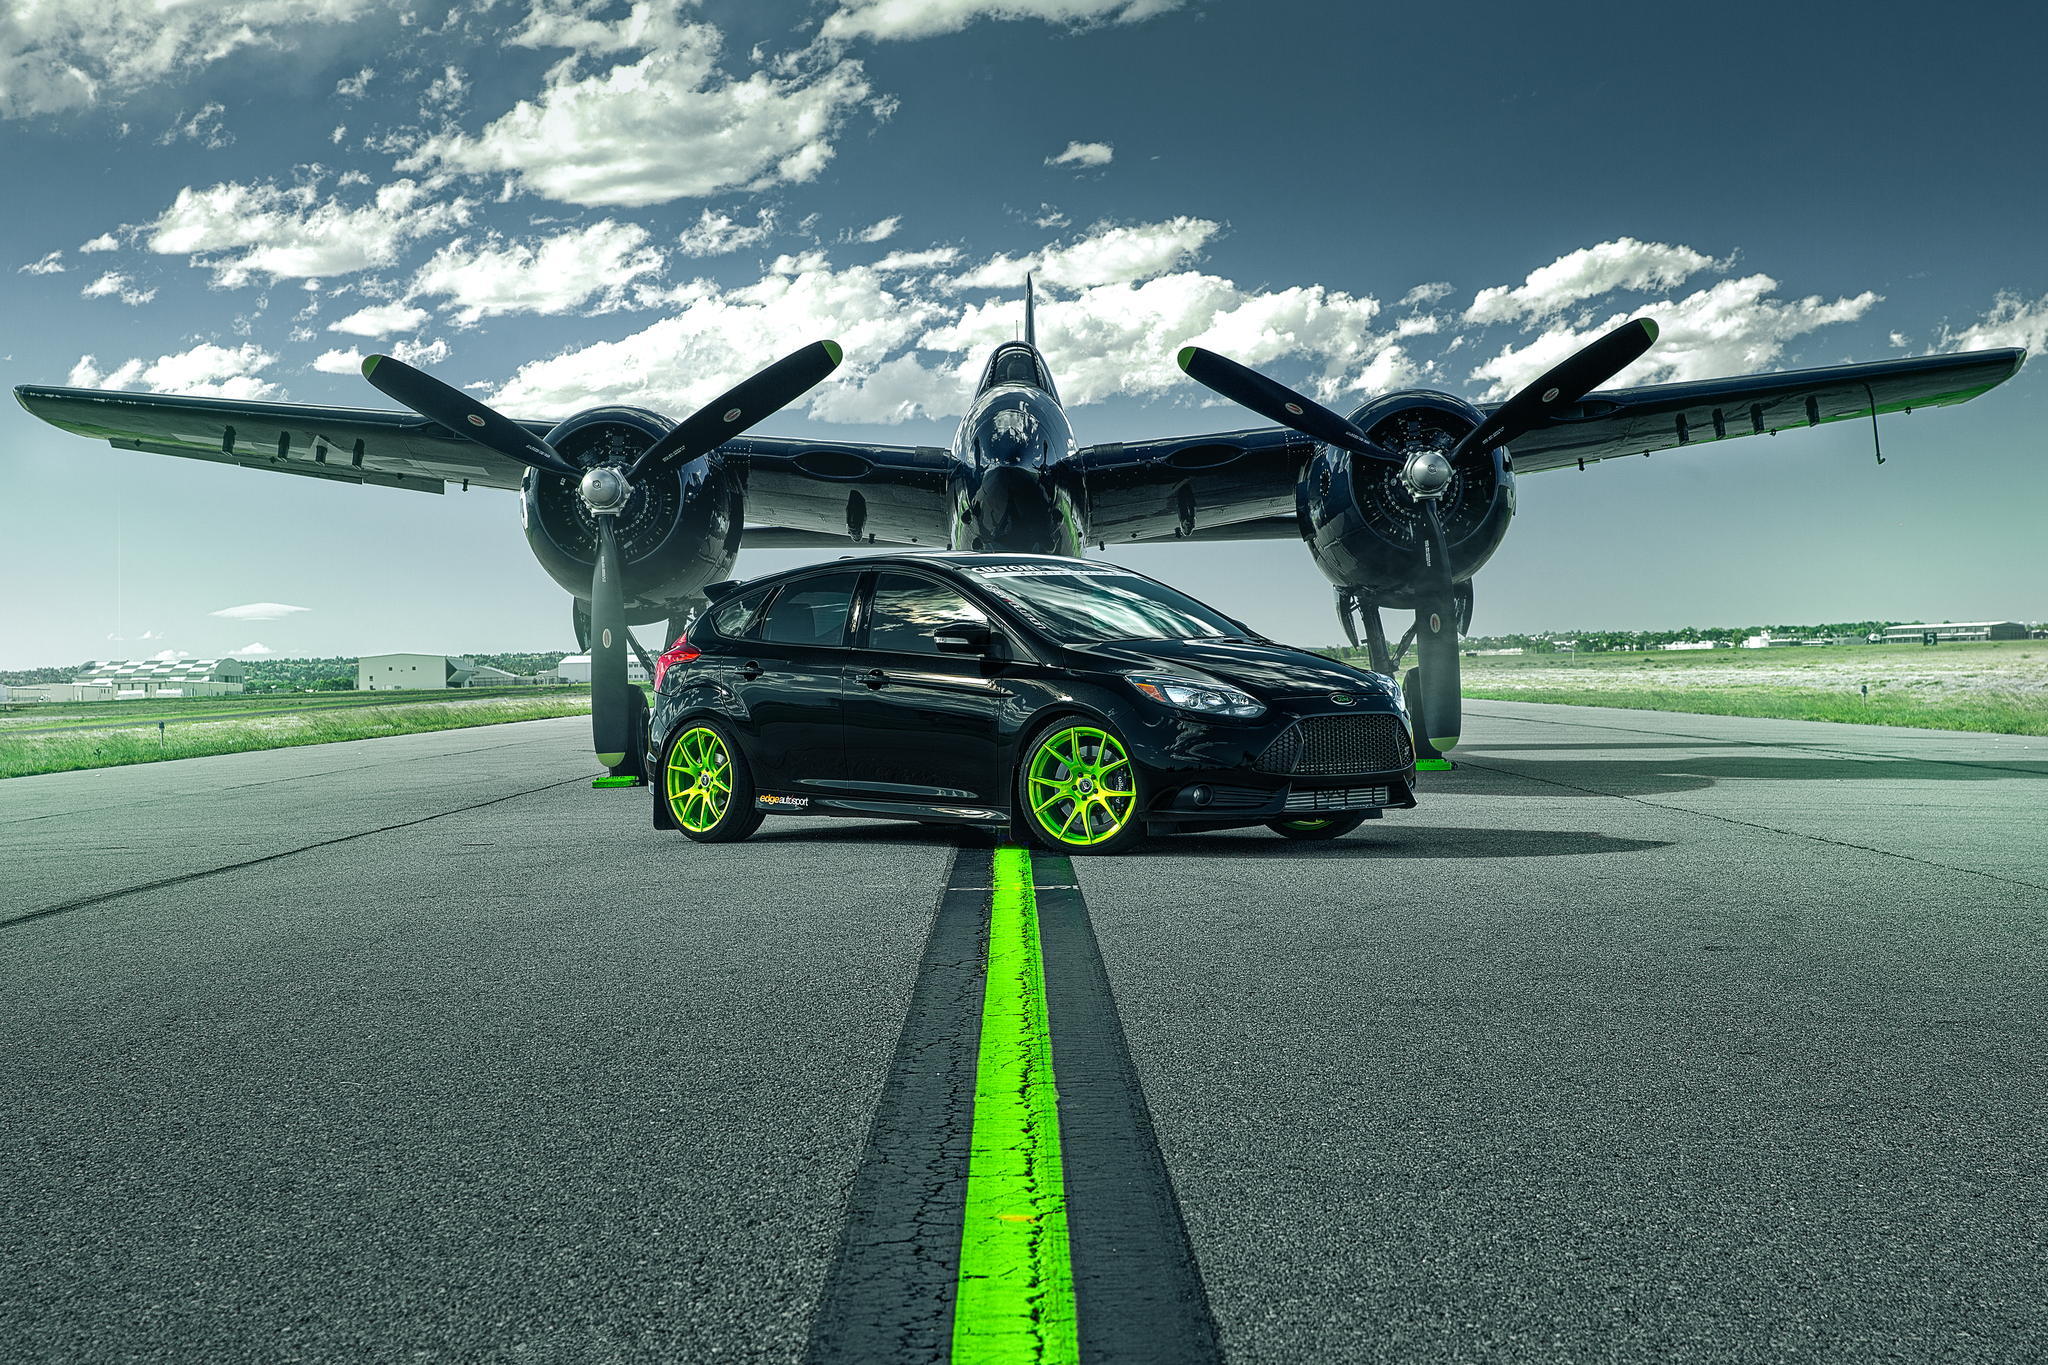 cars, plane, ford focus, ford, st, runway, airplane